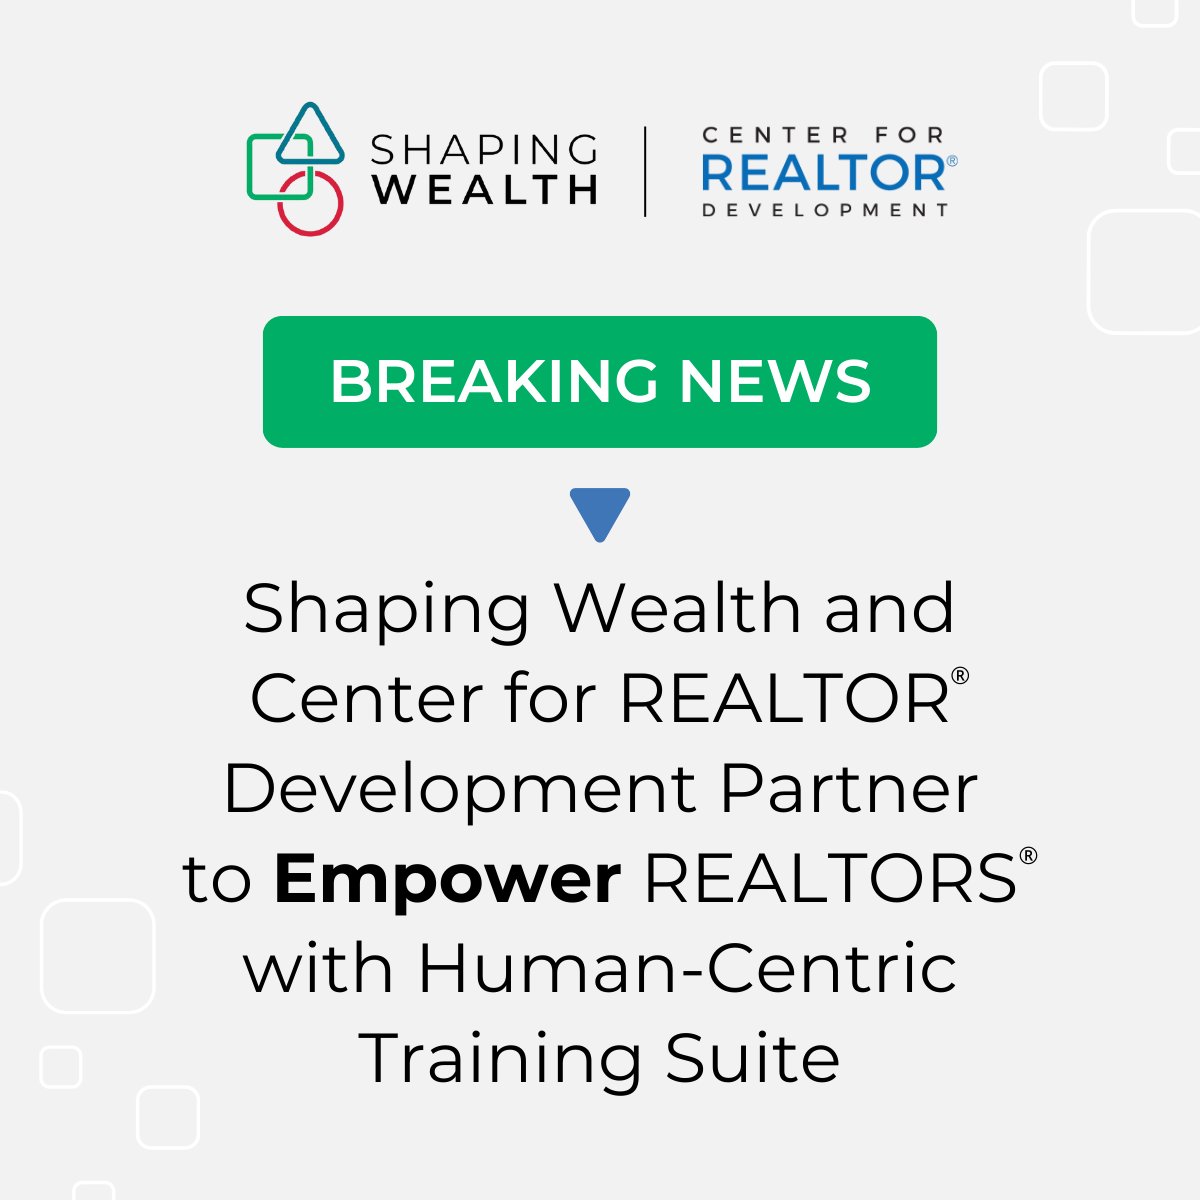 🚨 Breaking news! @shapingwealth and @nardotrealtor have teamed up for a transformative training led by @joylerepsyd expanding our reach beyond financial services. Learn more: nar.realtor/newsroom/cente… #ShapingWealth #EmotionalIntelligence #InspiredGrowth